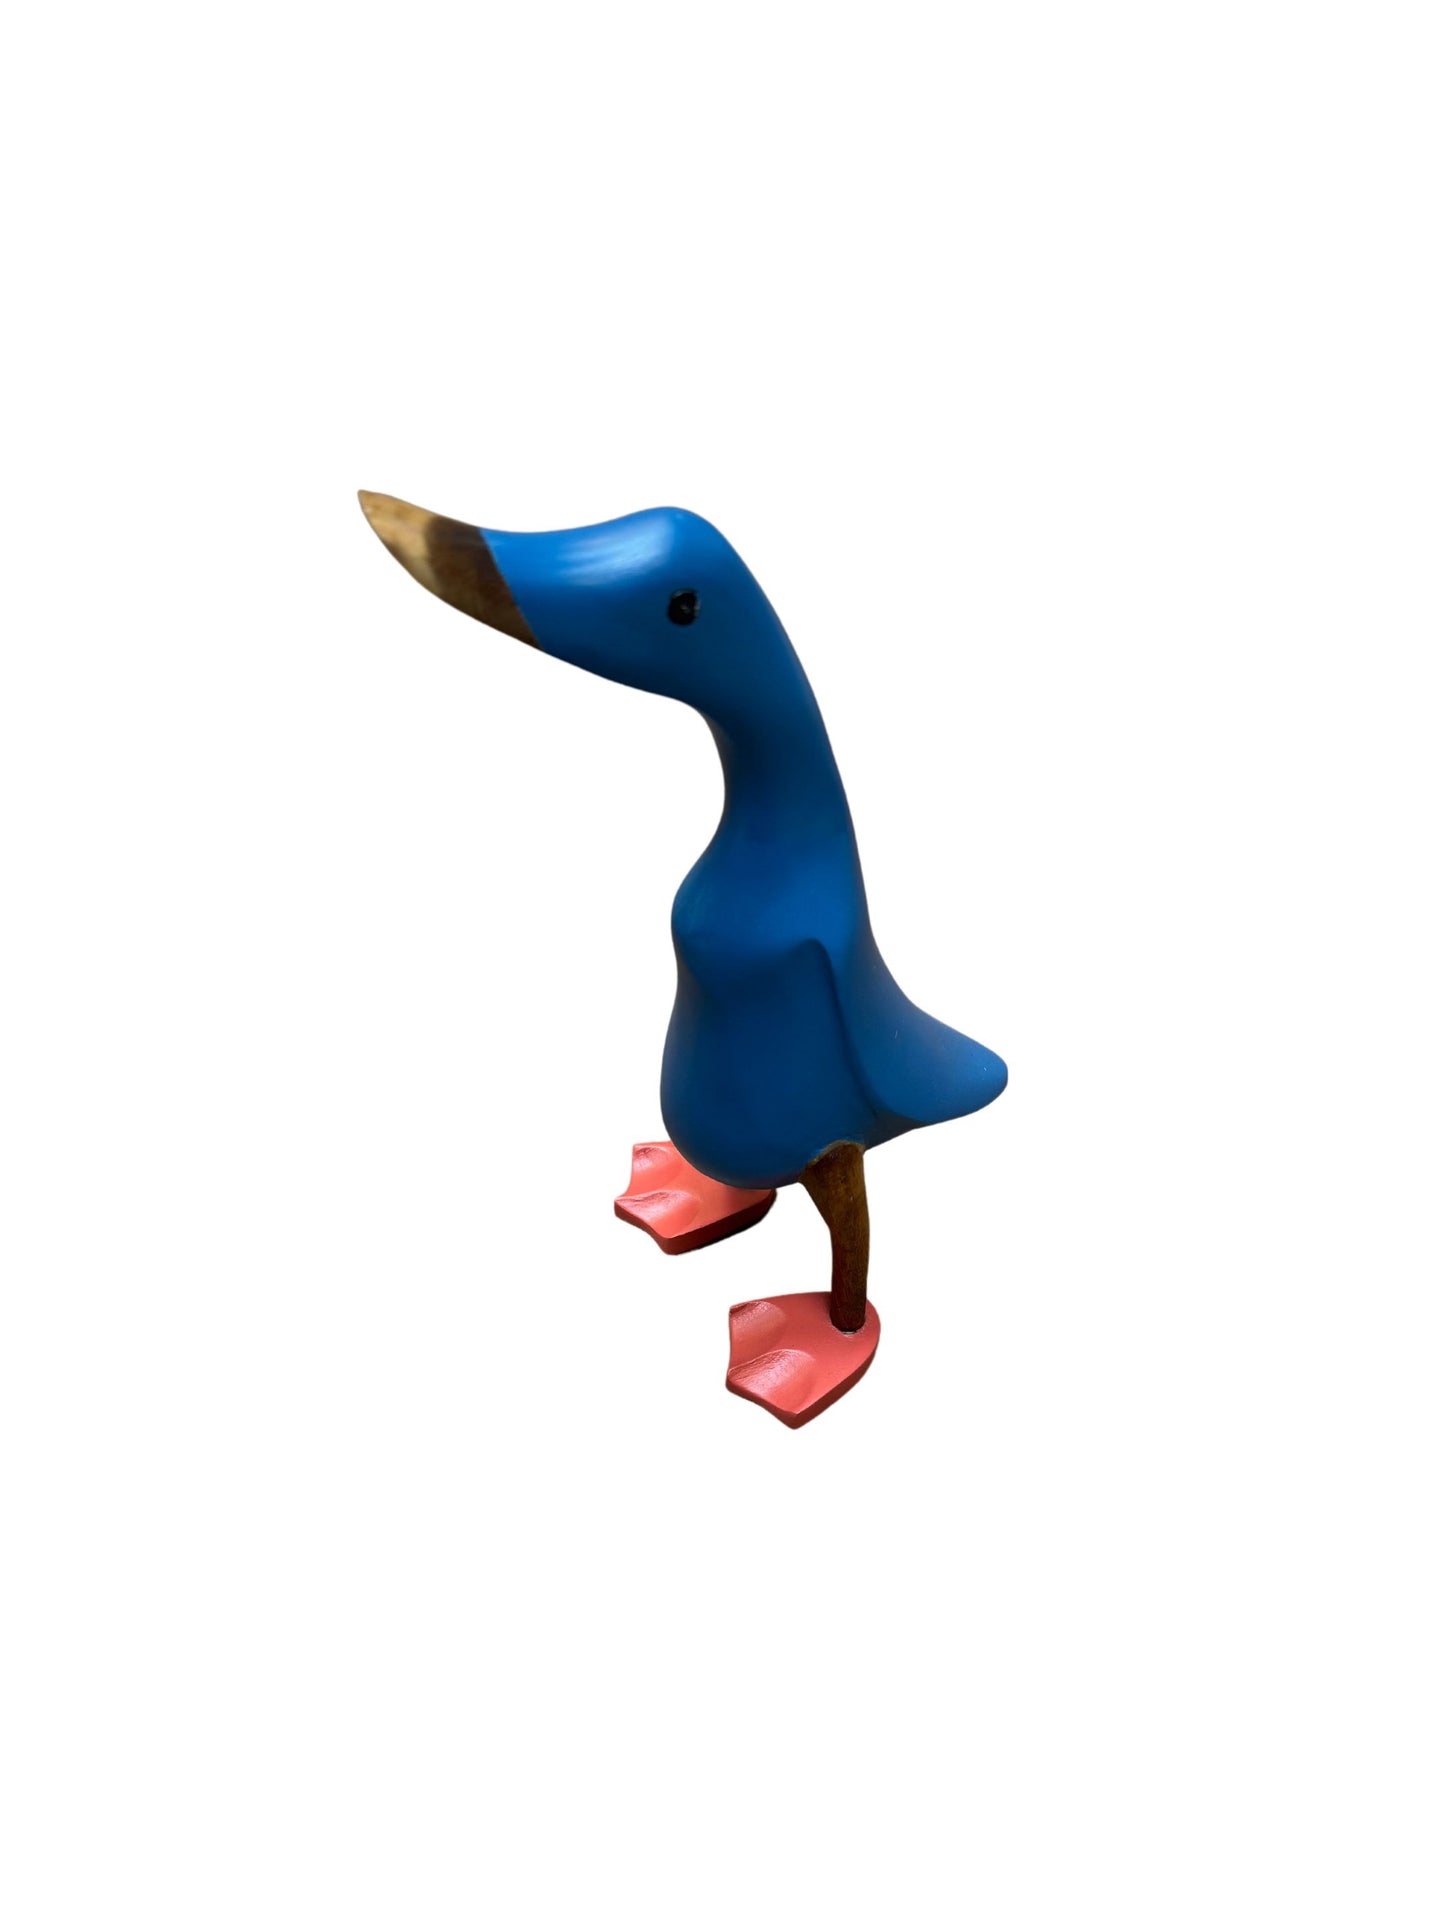 Eclectic Home Accent Duck in Boots Small Blue  Decor Furniture